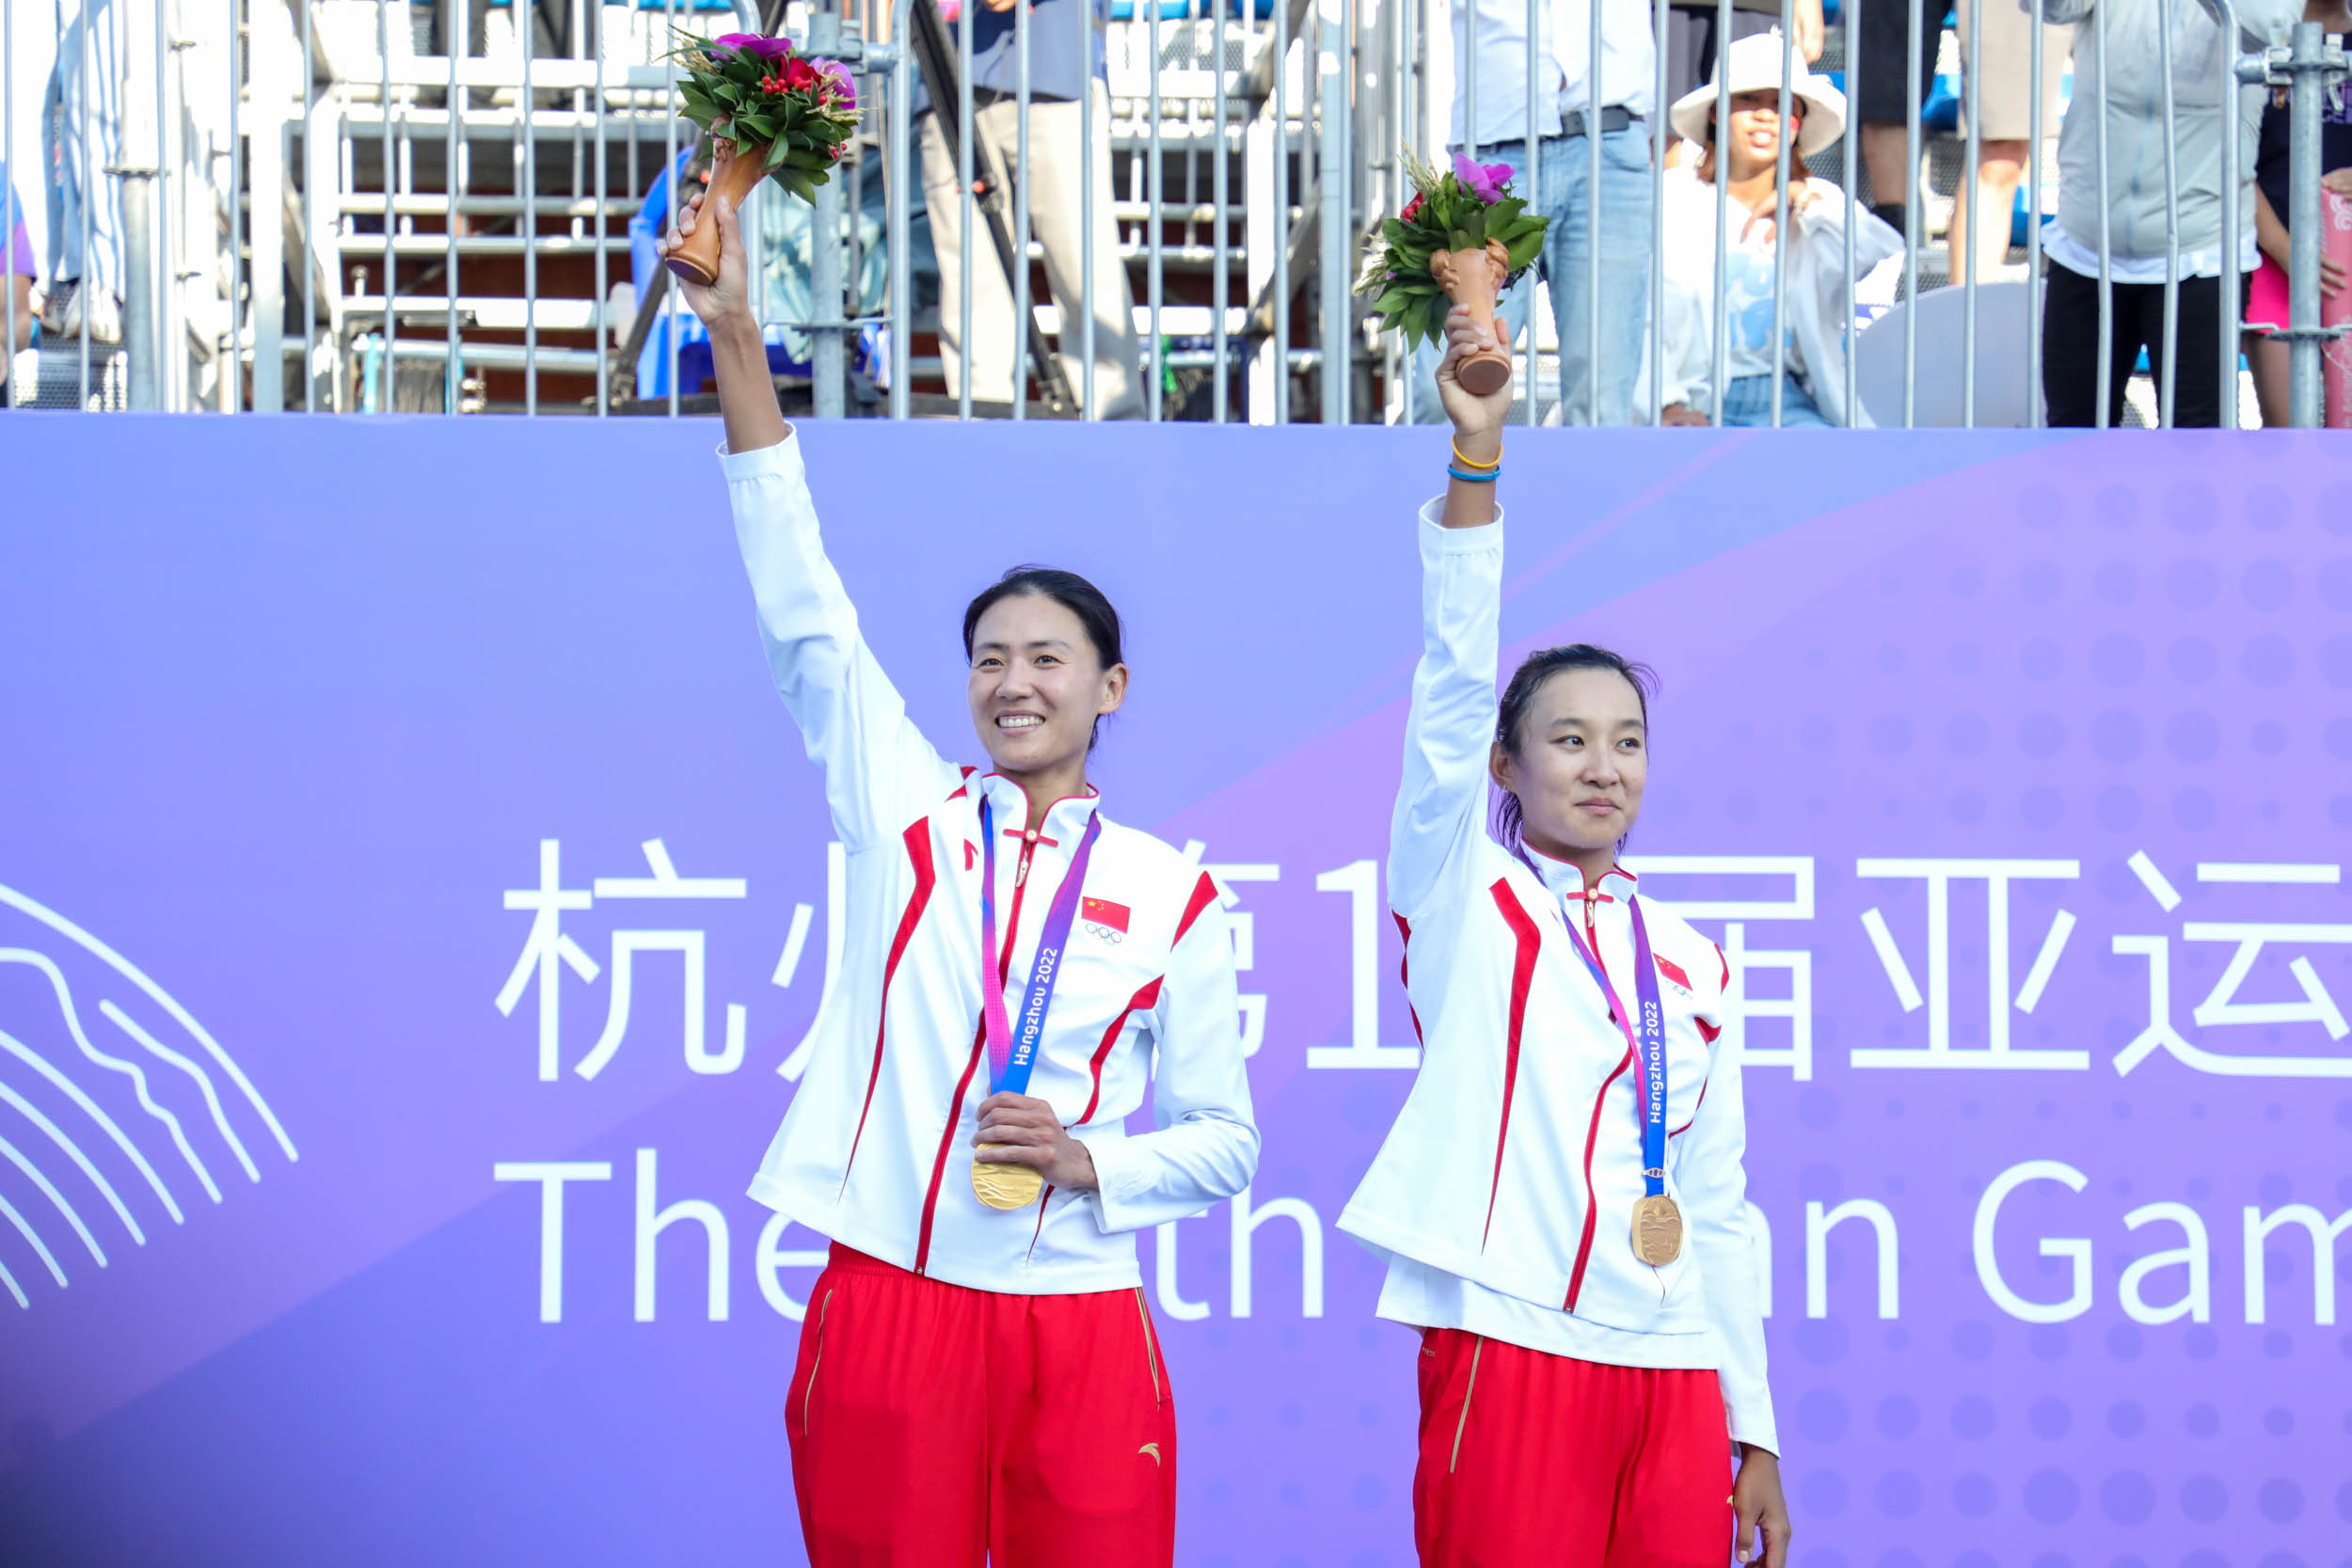 CHINESE XUE/XIA CLAIM GOLD MEDAL AT ASIAN GAMES WOMEN’S BEACH VOLLEYBALL COMPETITION - Asian Volleyball Confederation